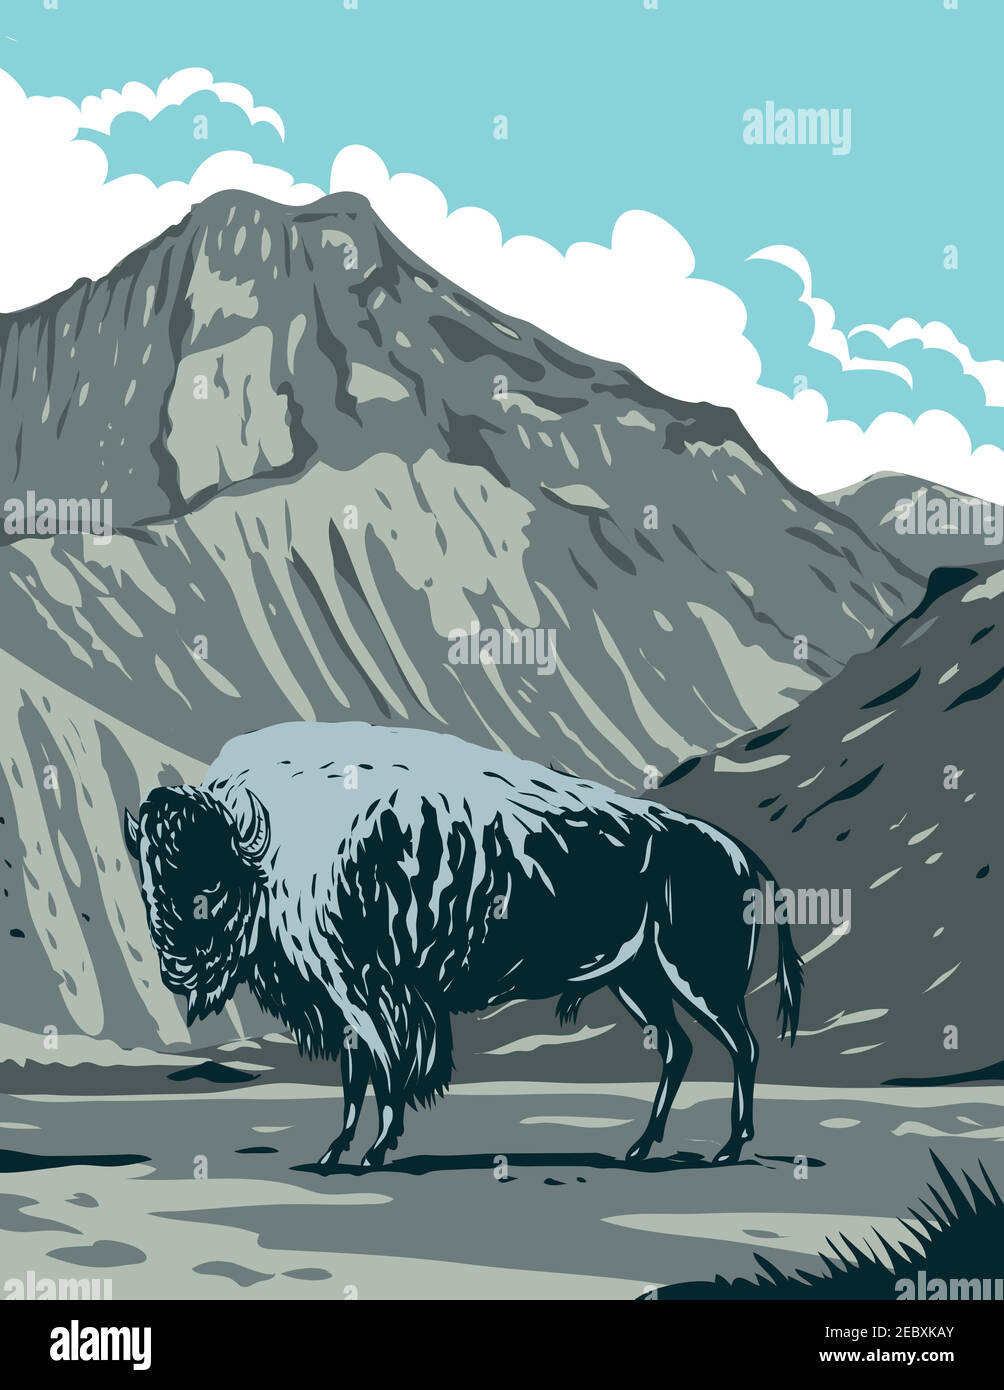 WPA poster art of an American bison with Eagle Peak mountain in Yellowstone National Park, Wyoming, United States of America done in works project adm Stock Vector